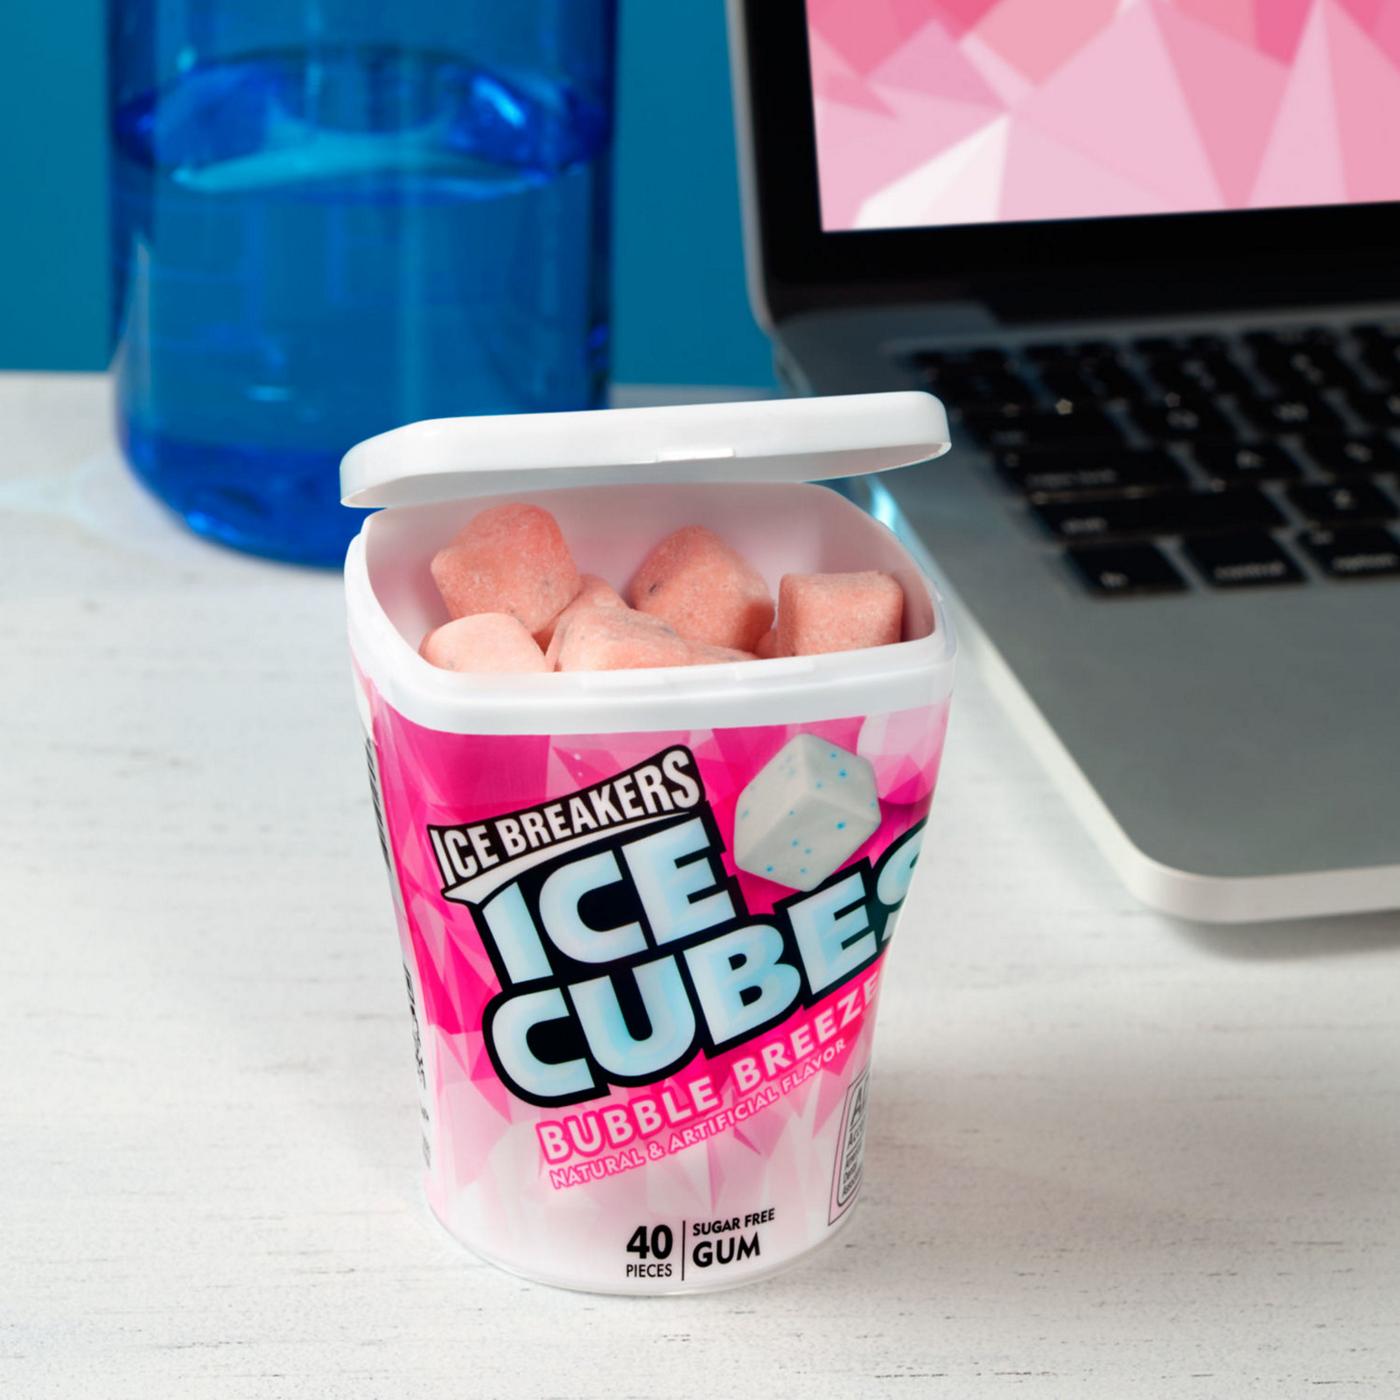 Ice Breakers Ice Cubes Sugar Free Chewing Gum - Bubble Breeze; image 5 of 7